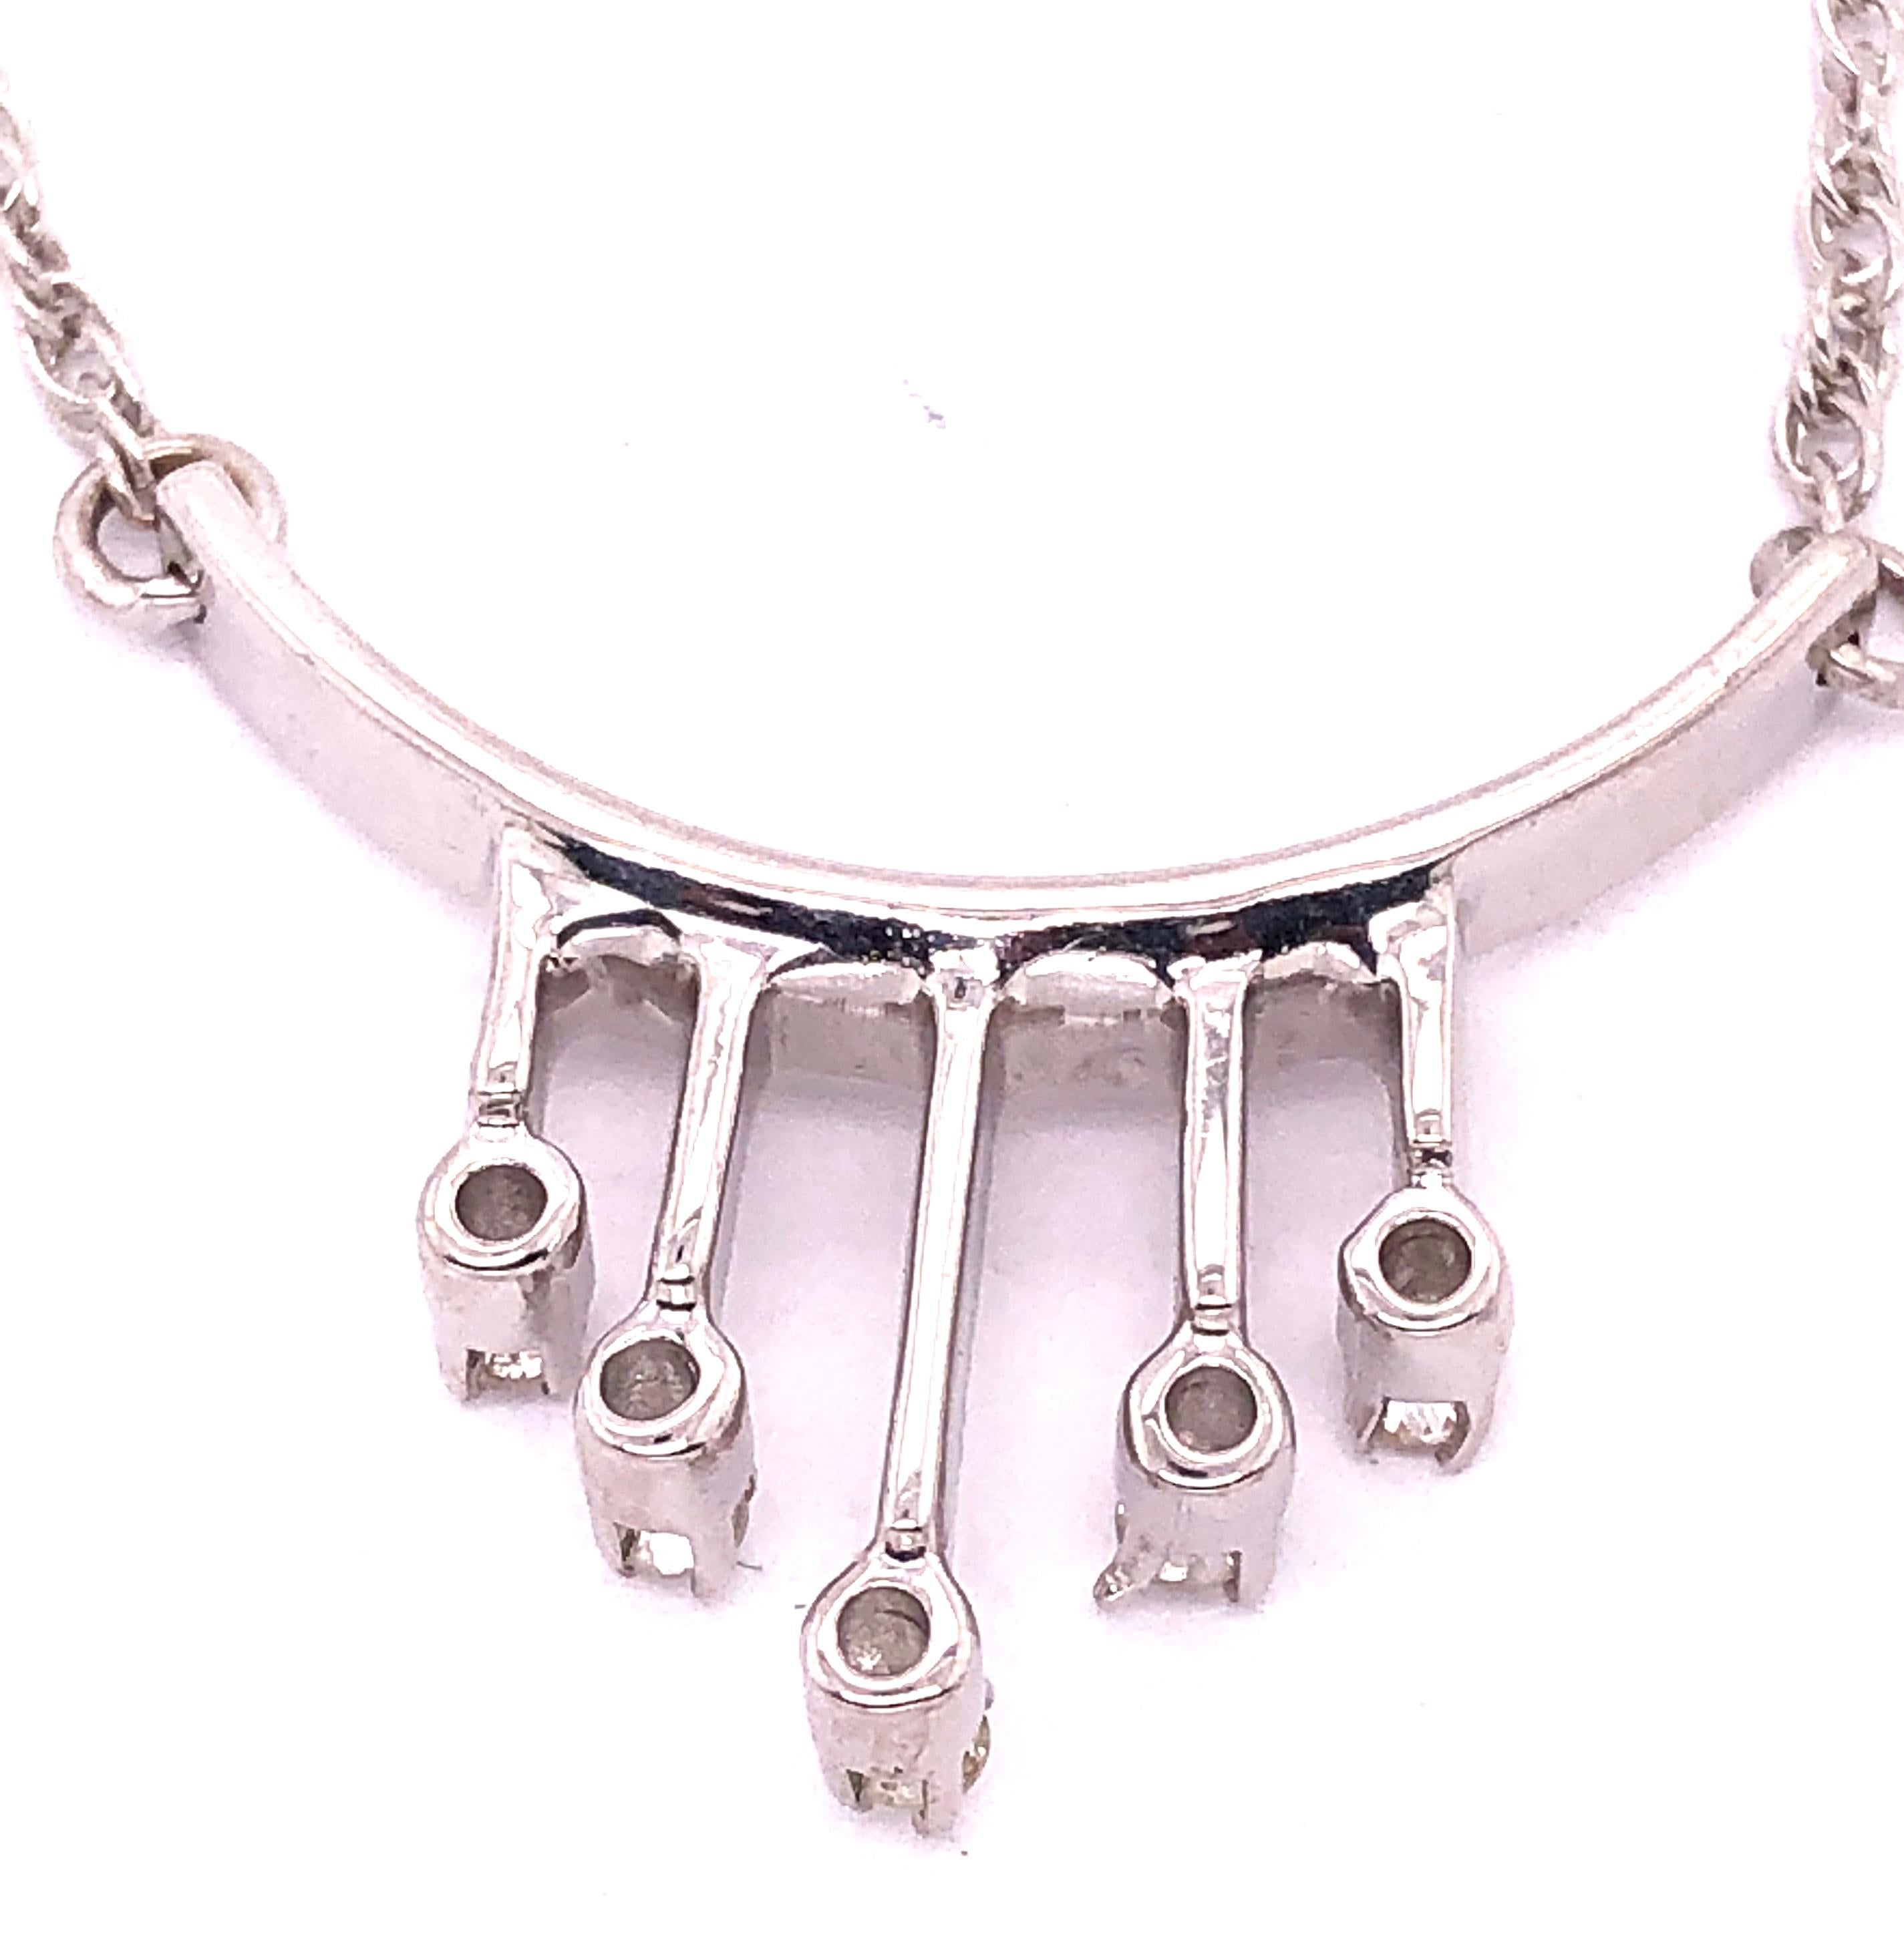 14 Karat White Gold Fancy Necklace with Diamonds For Sale 1